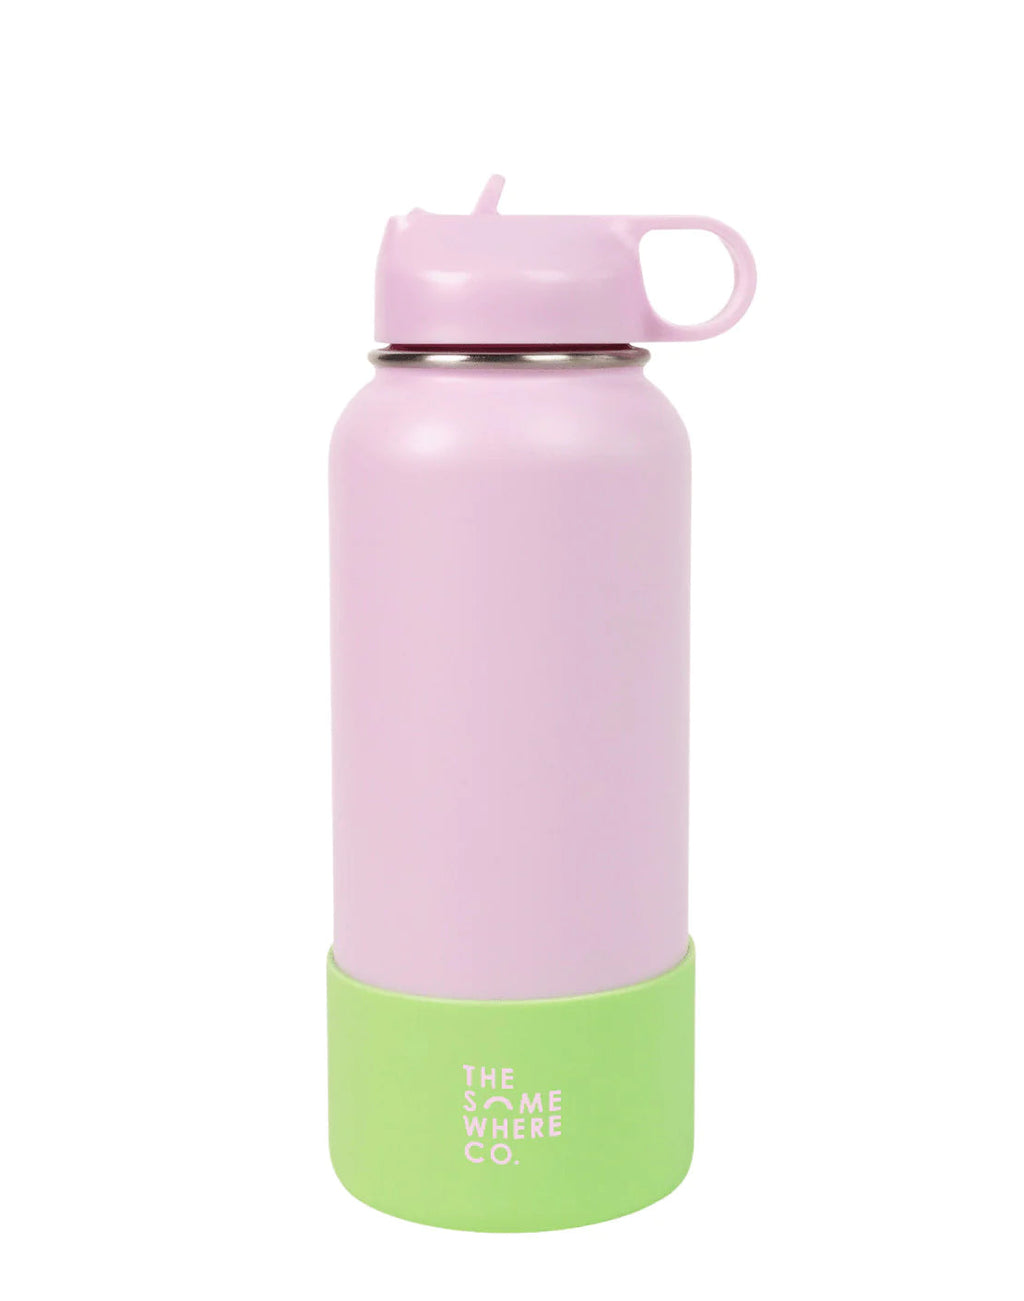 Candy Apple Water Bottle 1L Water Bottle The Somewhere Co 